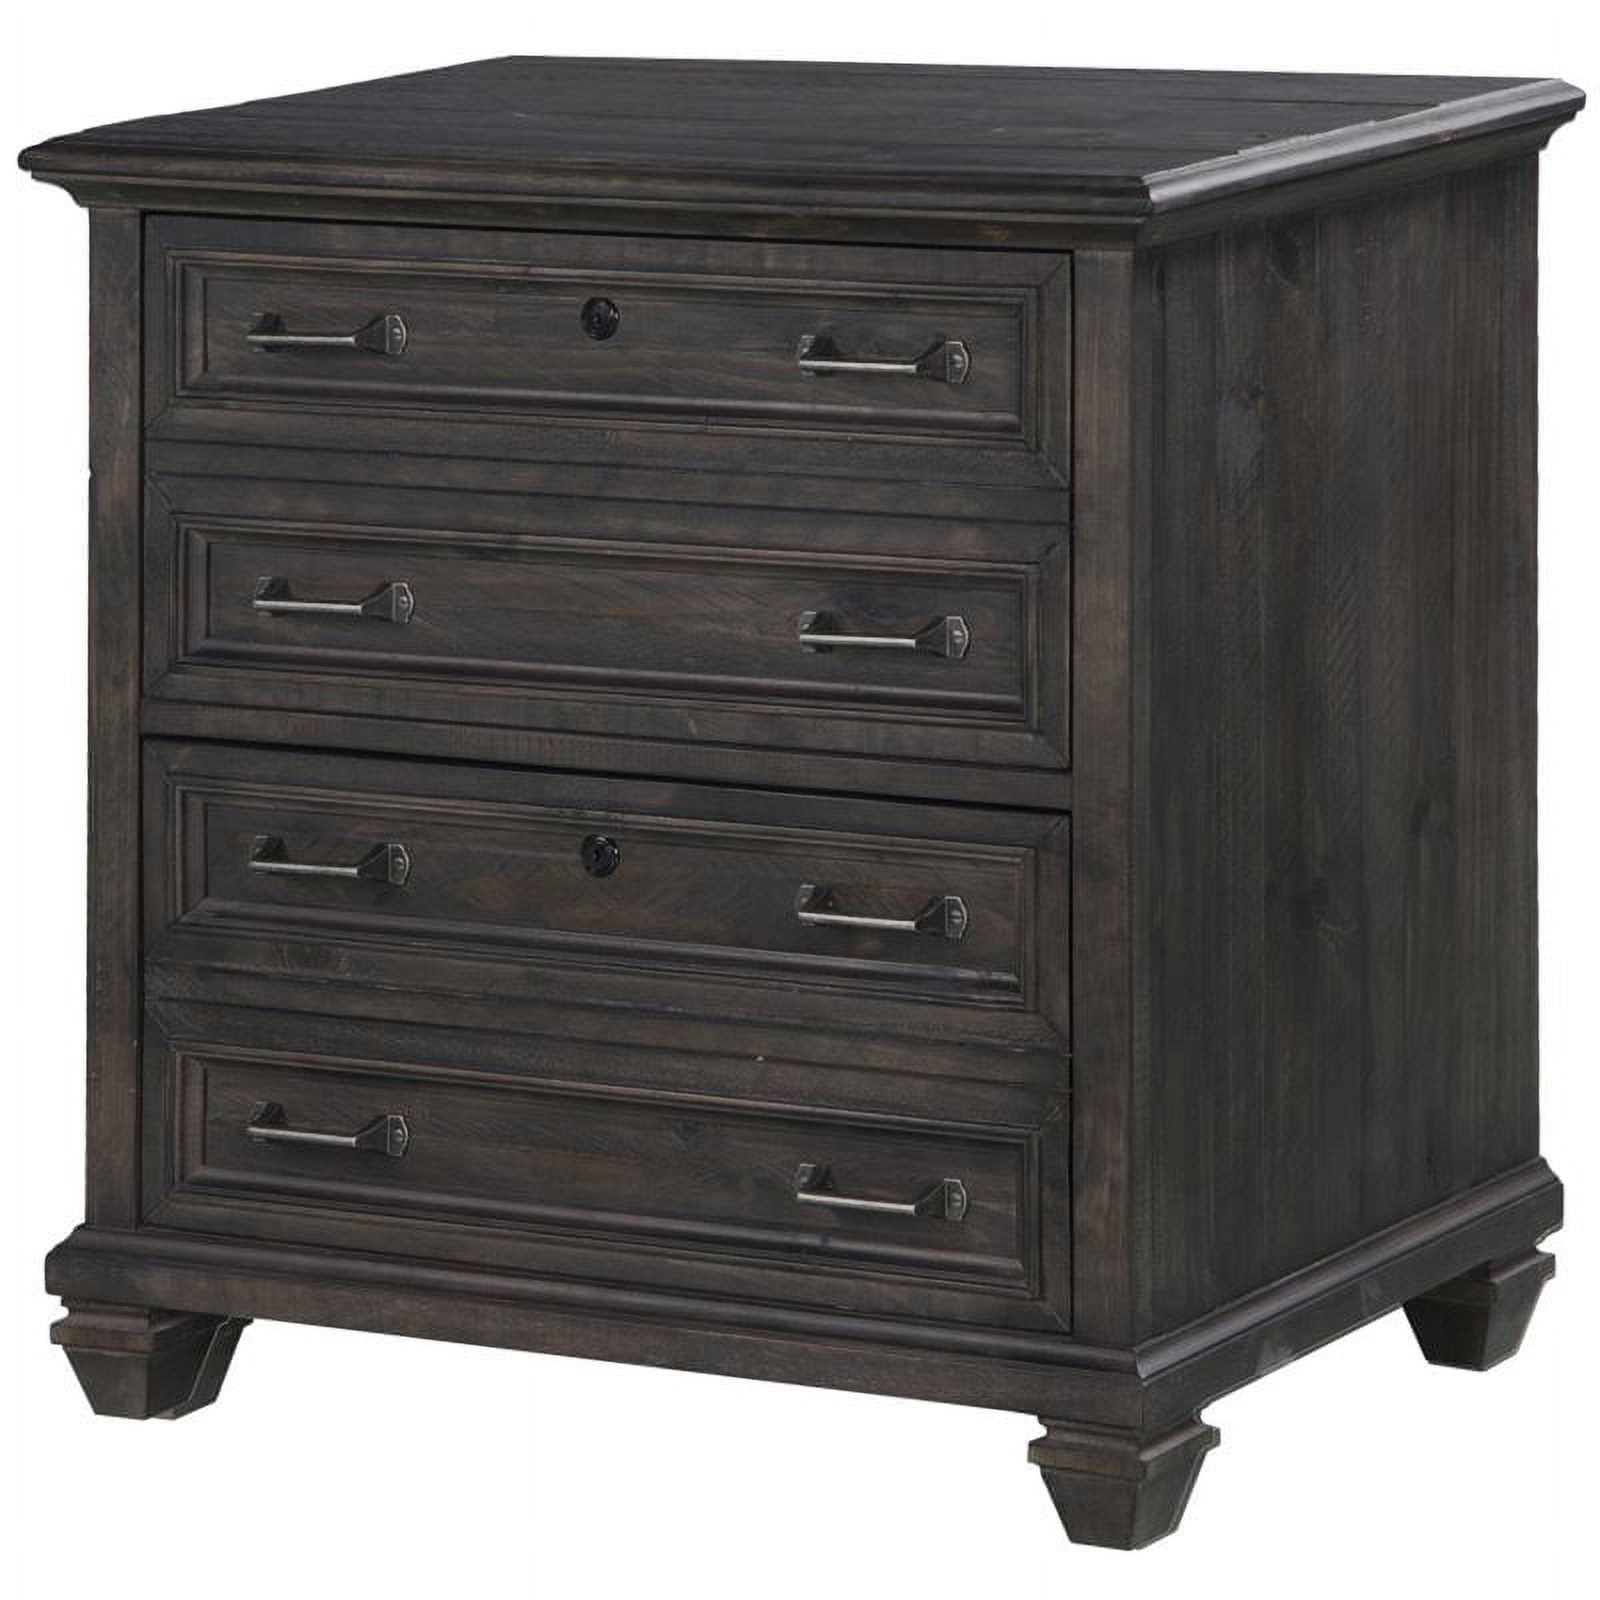 Beaumont Lane 4 Drawer Lateral File Cabinet in Weathered Charcoal - image 2 of 3